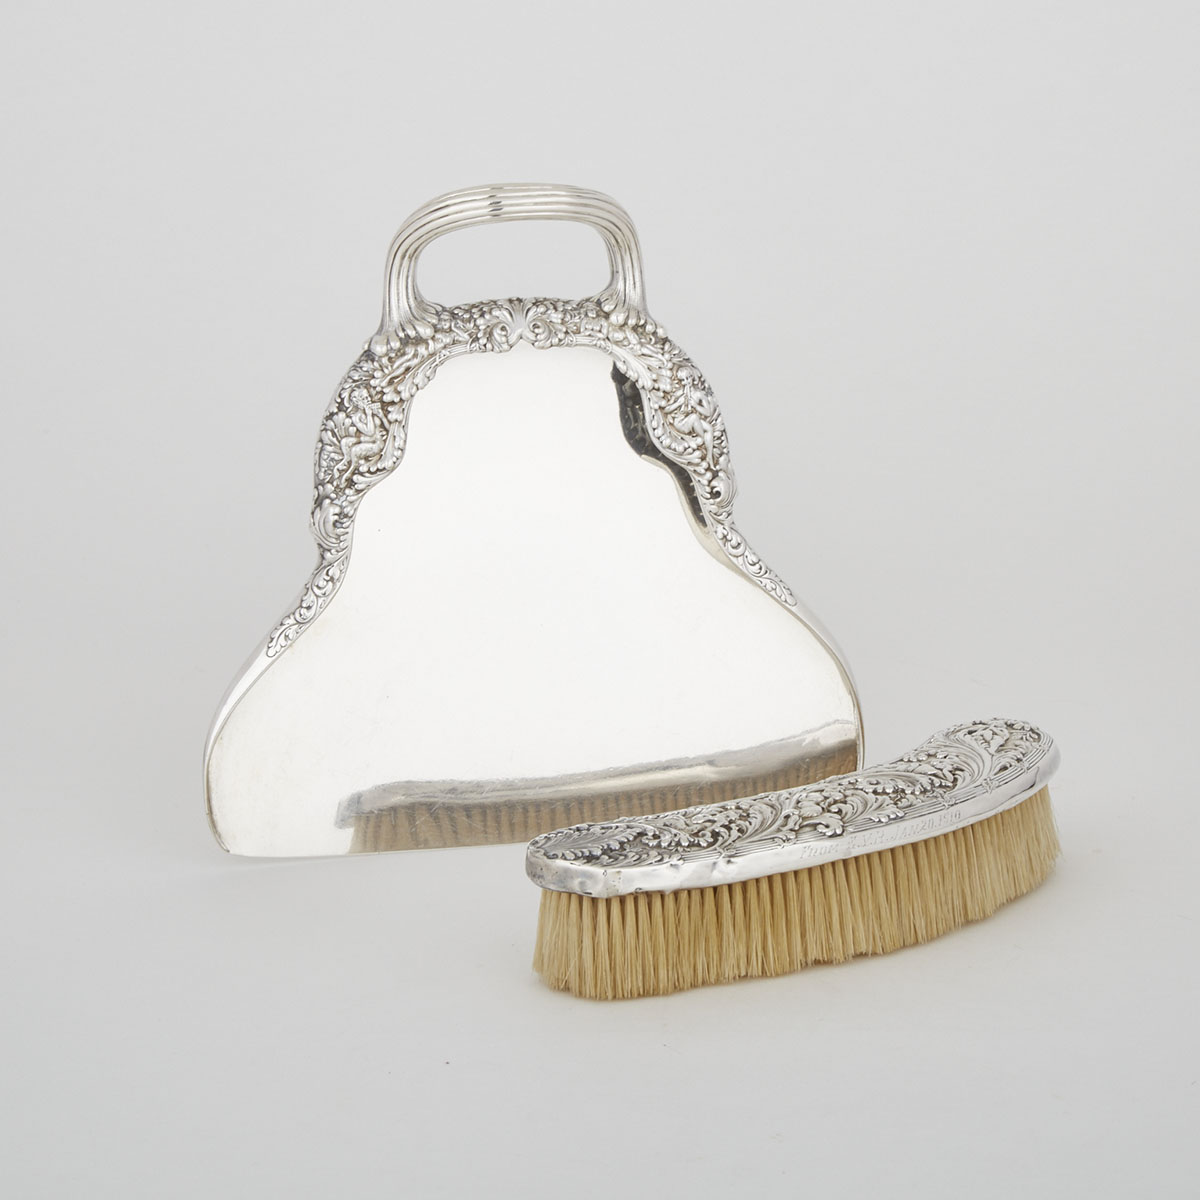 American Silver Crumb Catcher and Brush, Tiffany & Co., New York, N.Y., c.1900